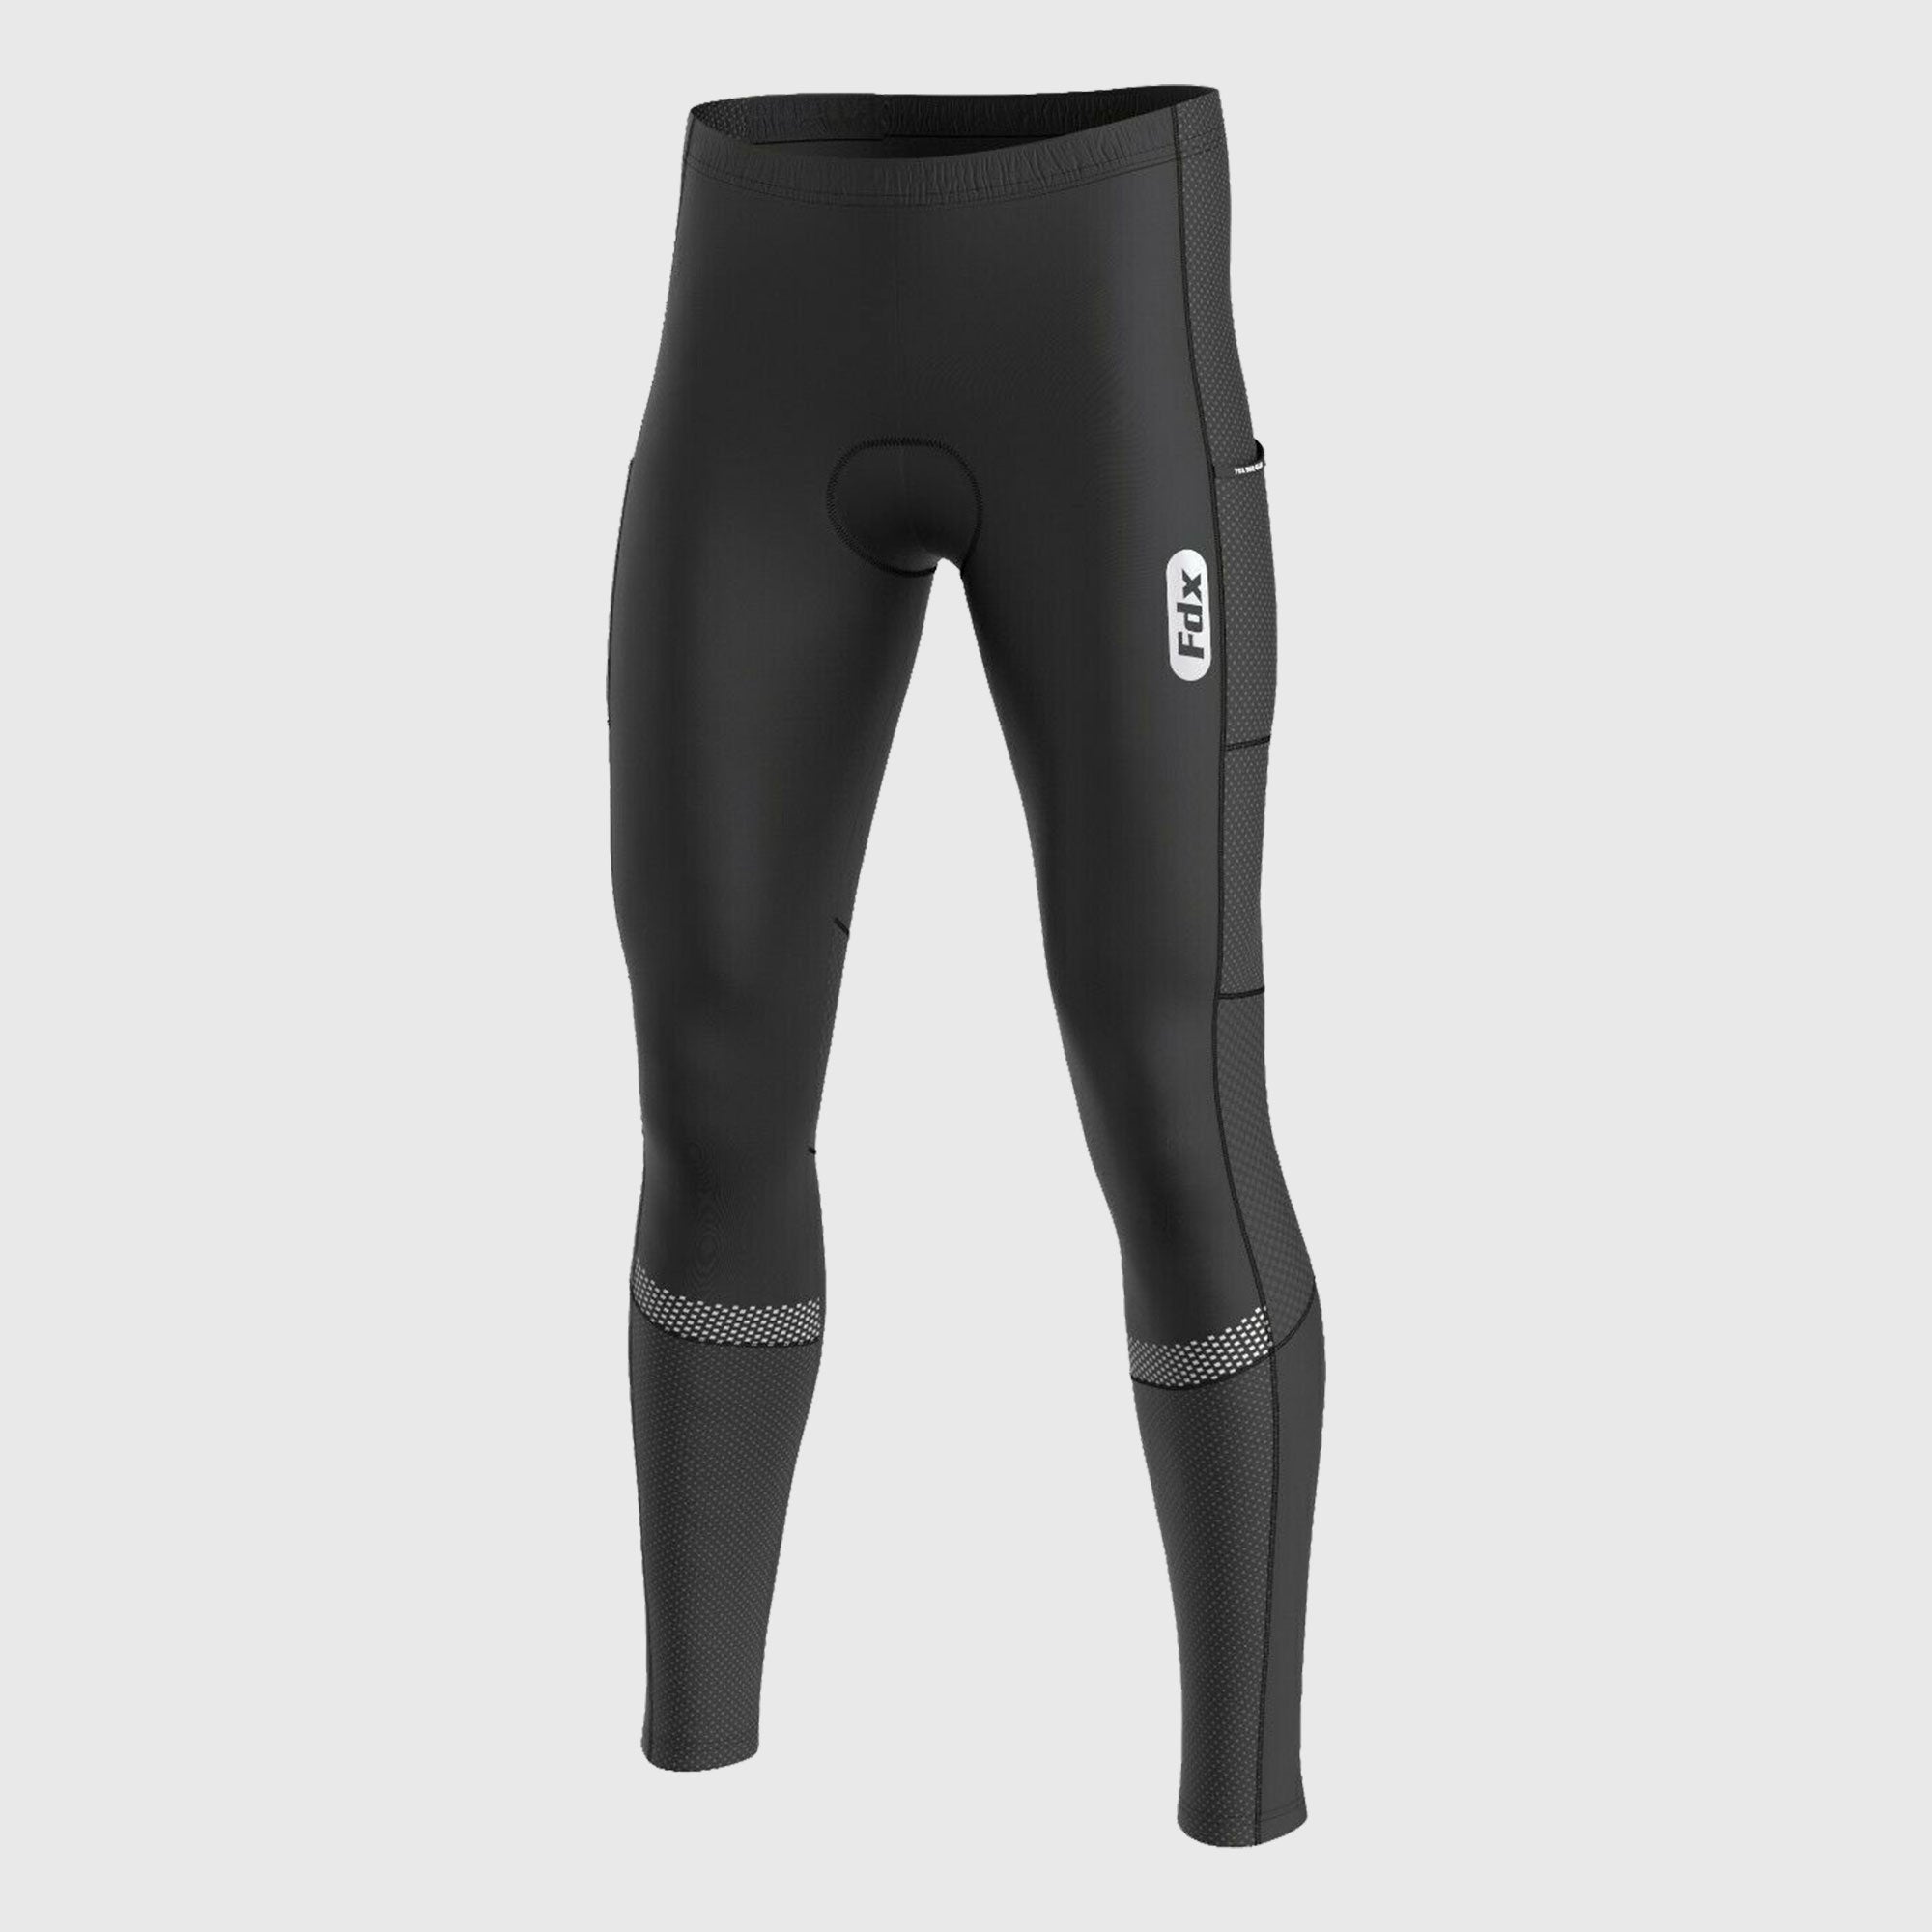 Fdx Mens Black Chamois Gel Padded Cycling Tights For Winter Roubaix Thermal Fleece Reflective Warm Leggings - All Day Bike Long Pants